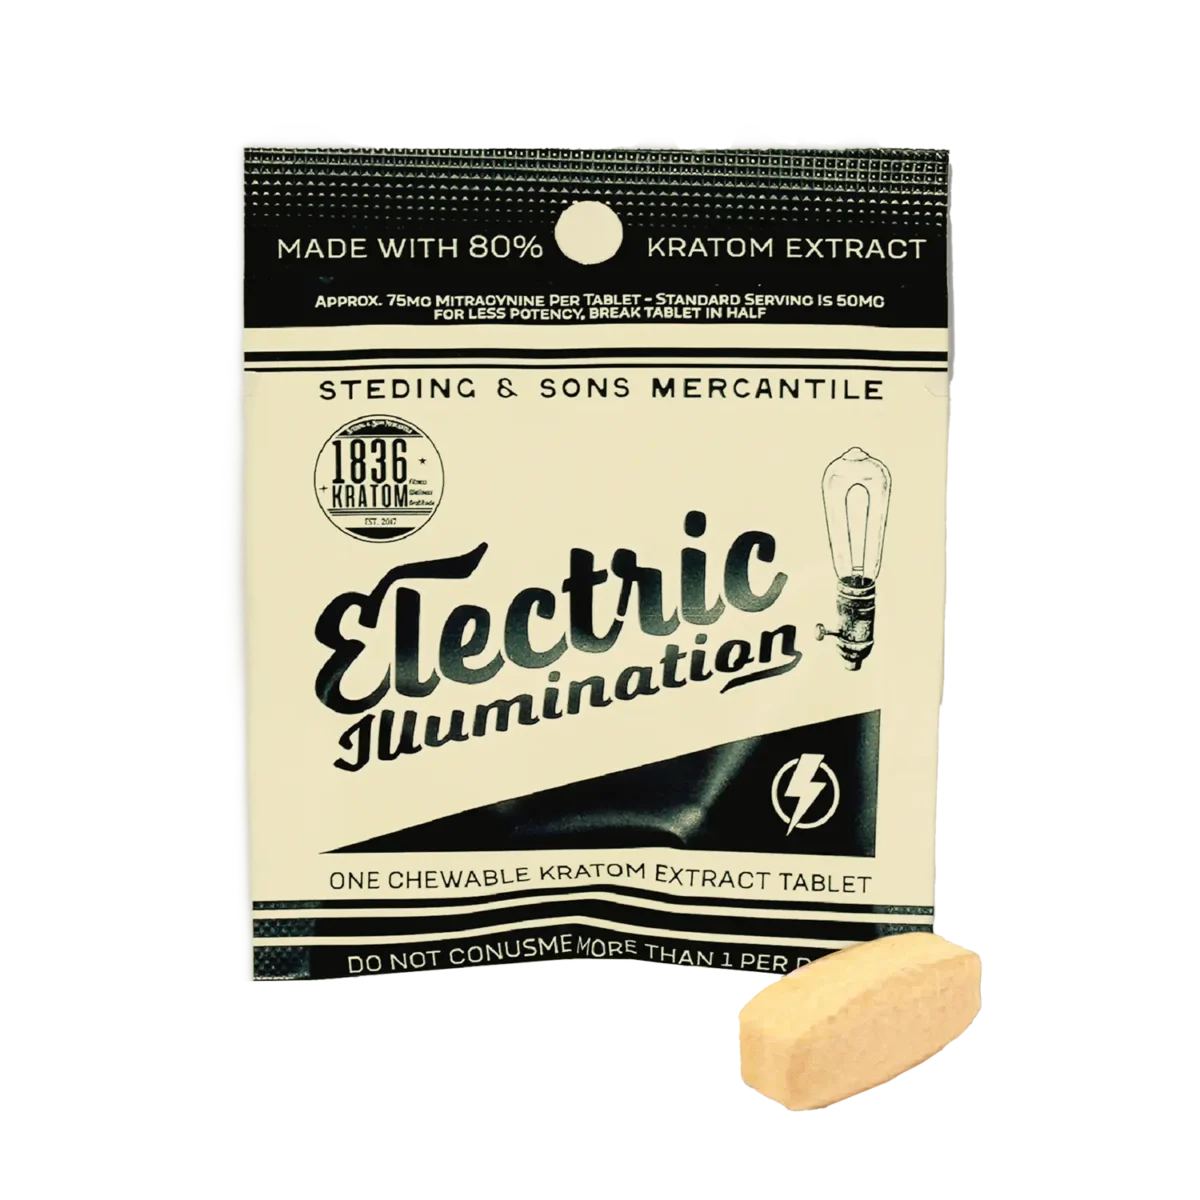 1836 Kratom White Electric Illumination Chewable Extract Tablets